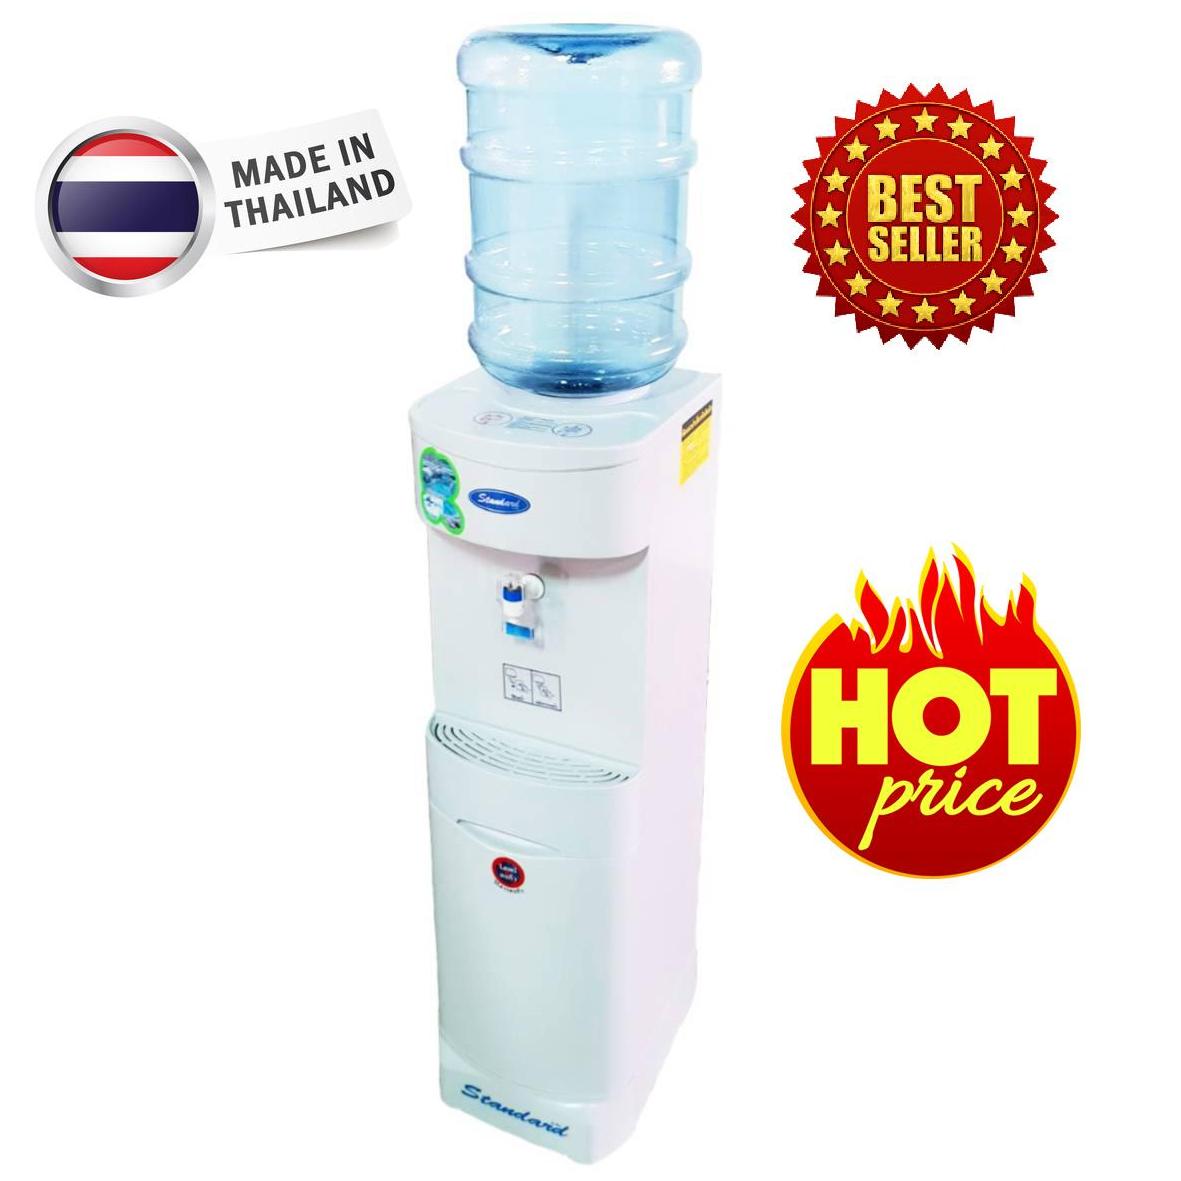 Water Dispenser Plastic Standard By Rwc with Warranty compresses 2 years